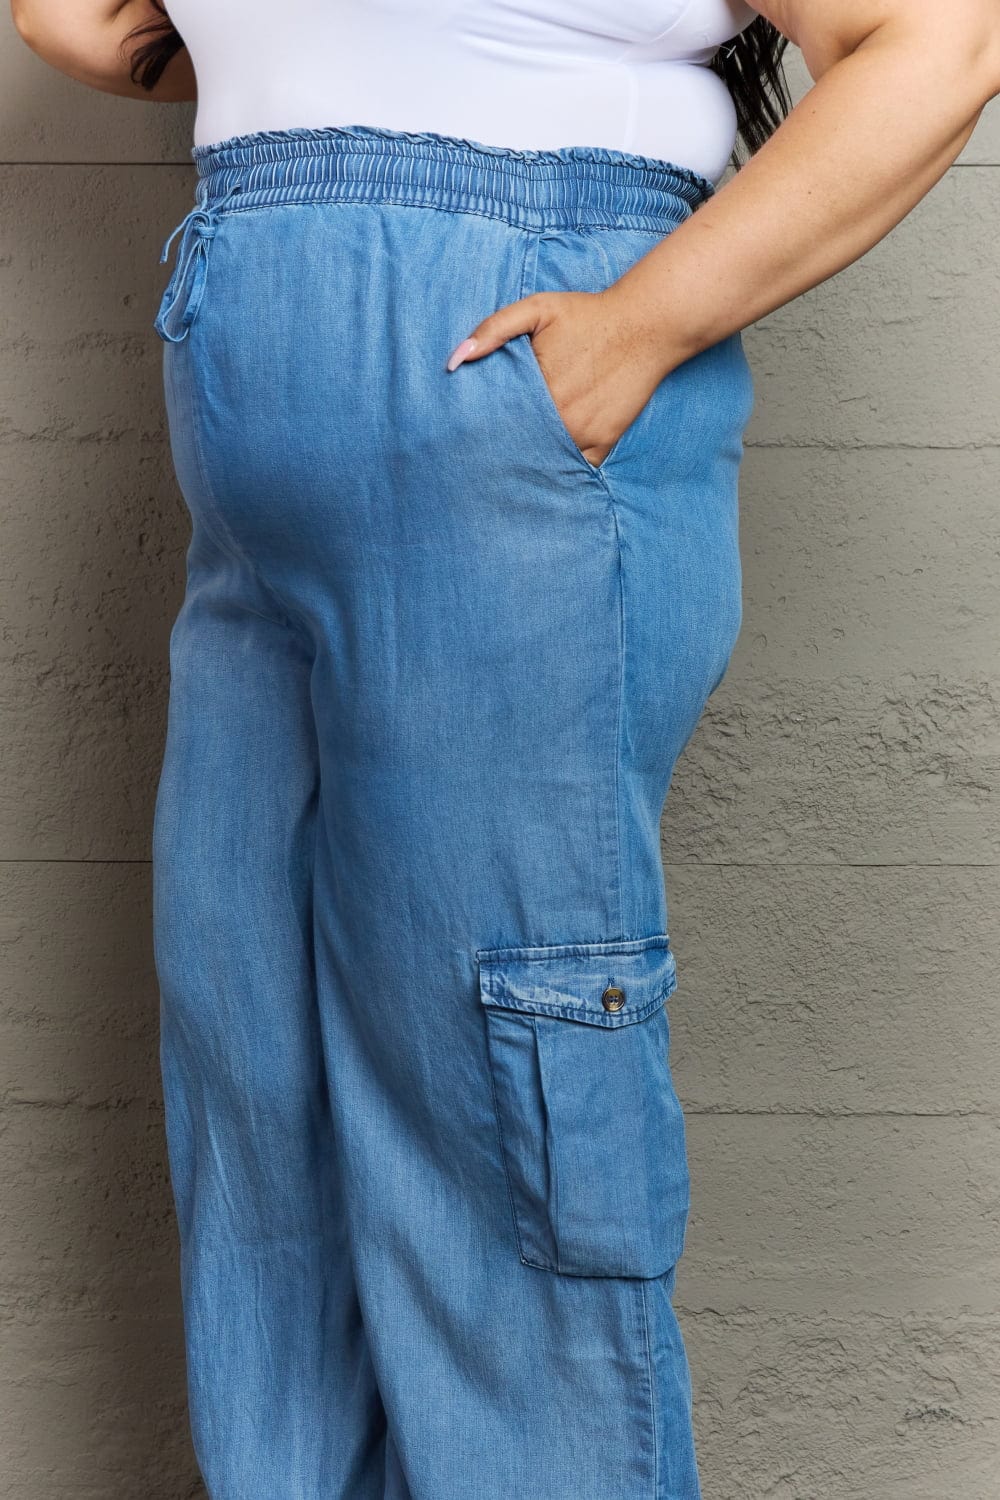 Out Of Site Full Size Denim Cargo Pants - Body By J'ne